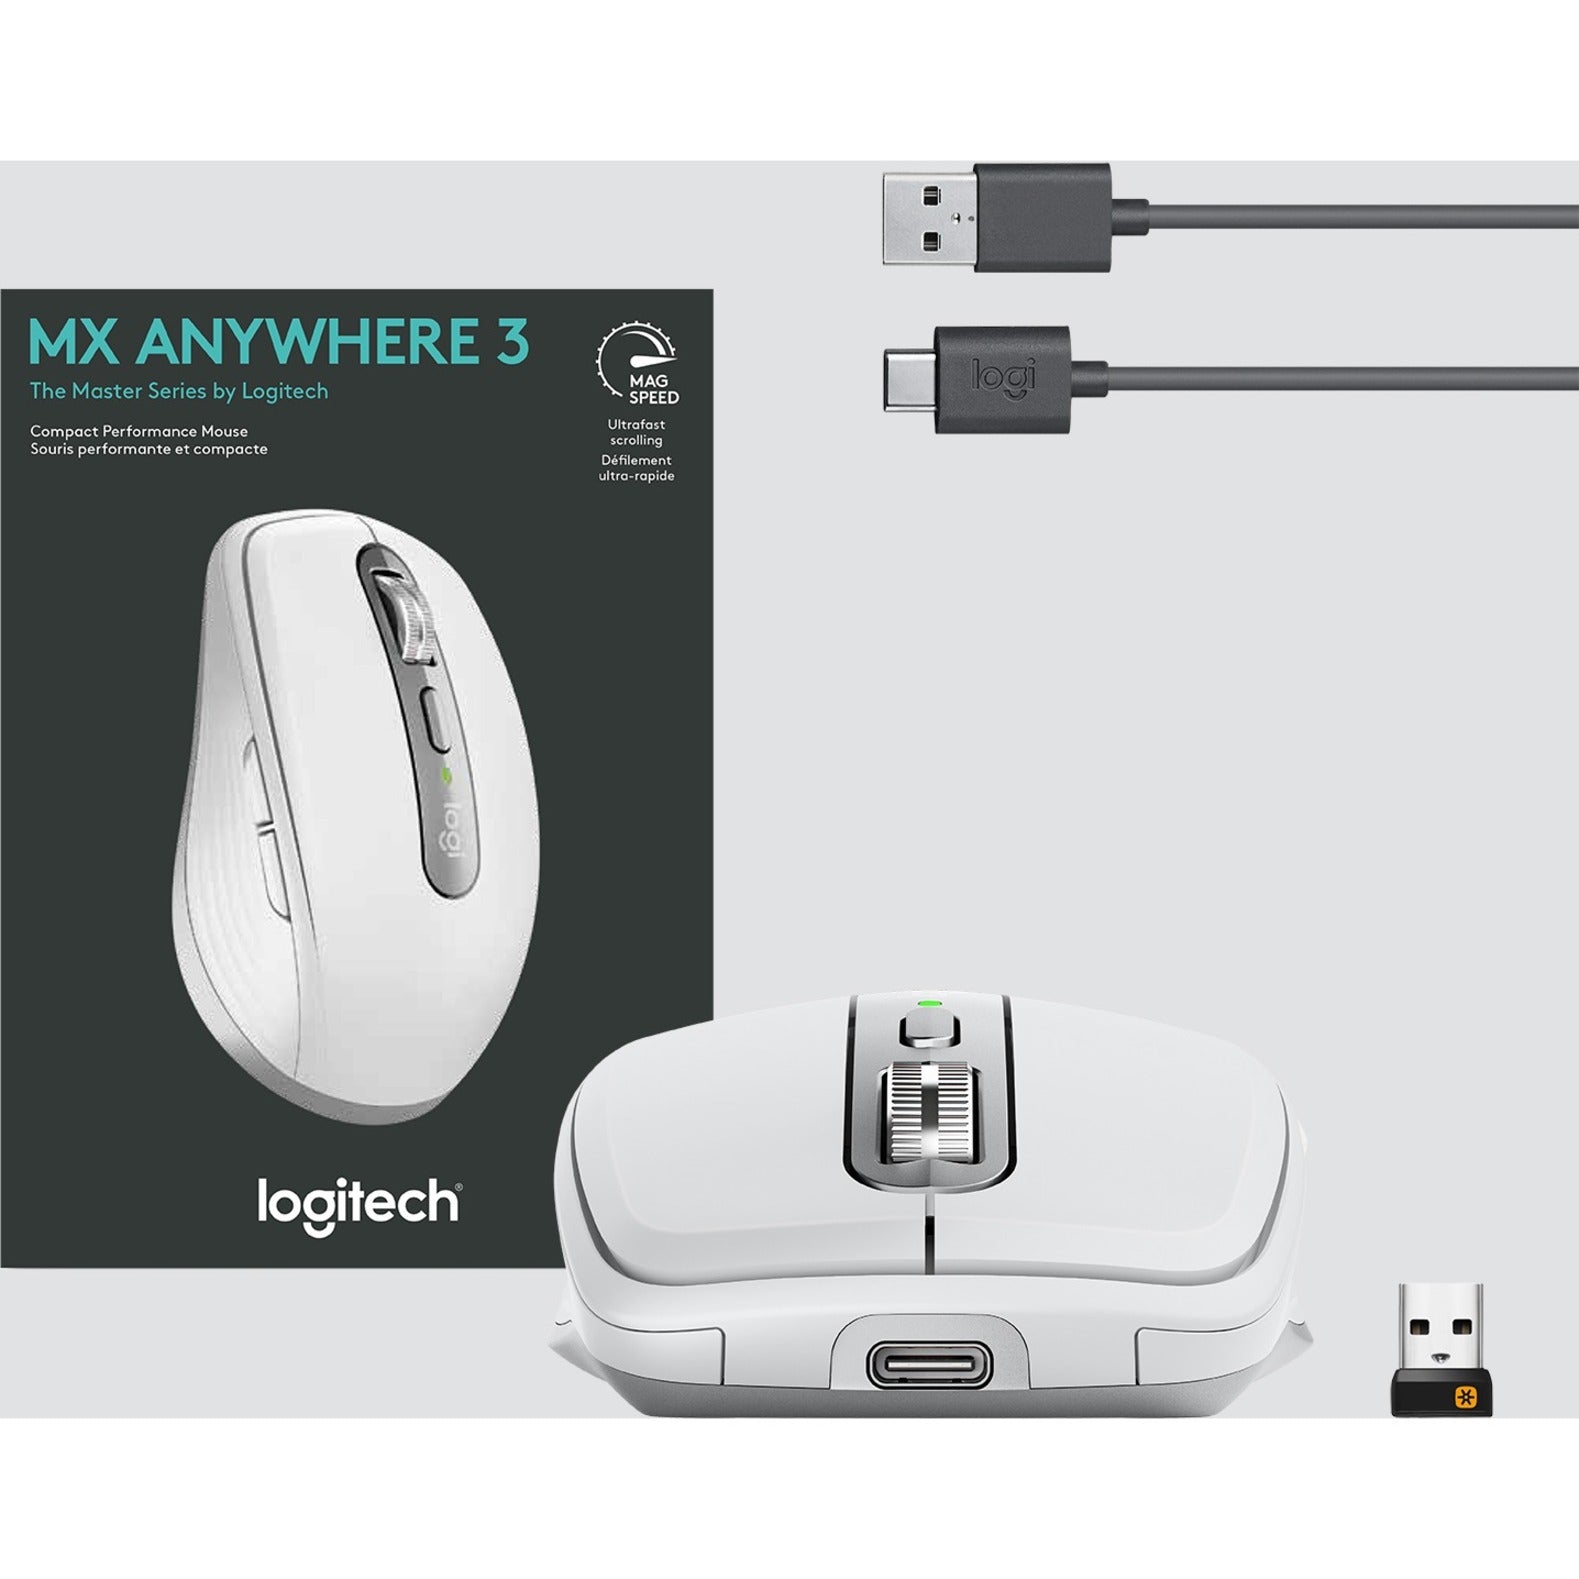 Logitech 910-005985 MX Anywhere 3 Wireless Mouse, Darkfield Scroller, 4000 dpi, USB-C Rechargeable